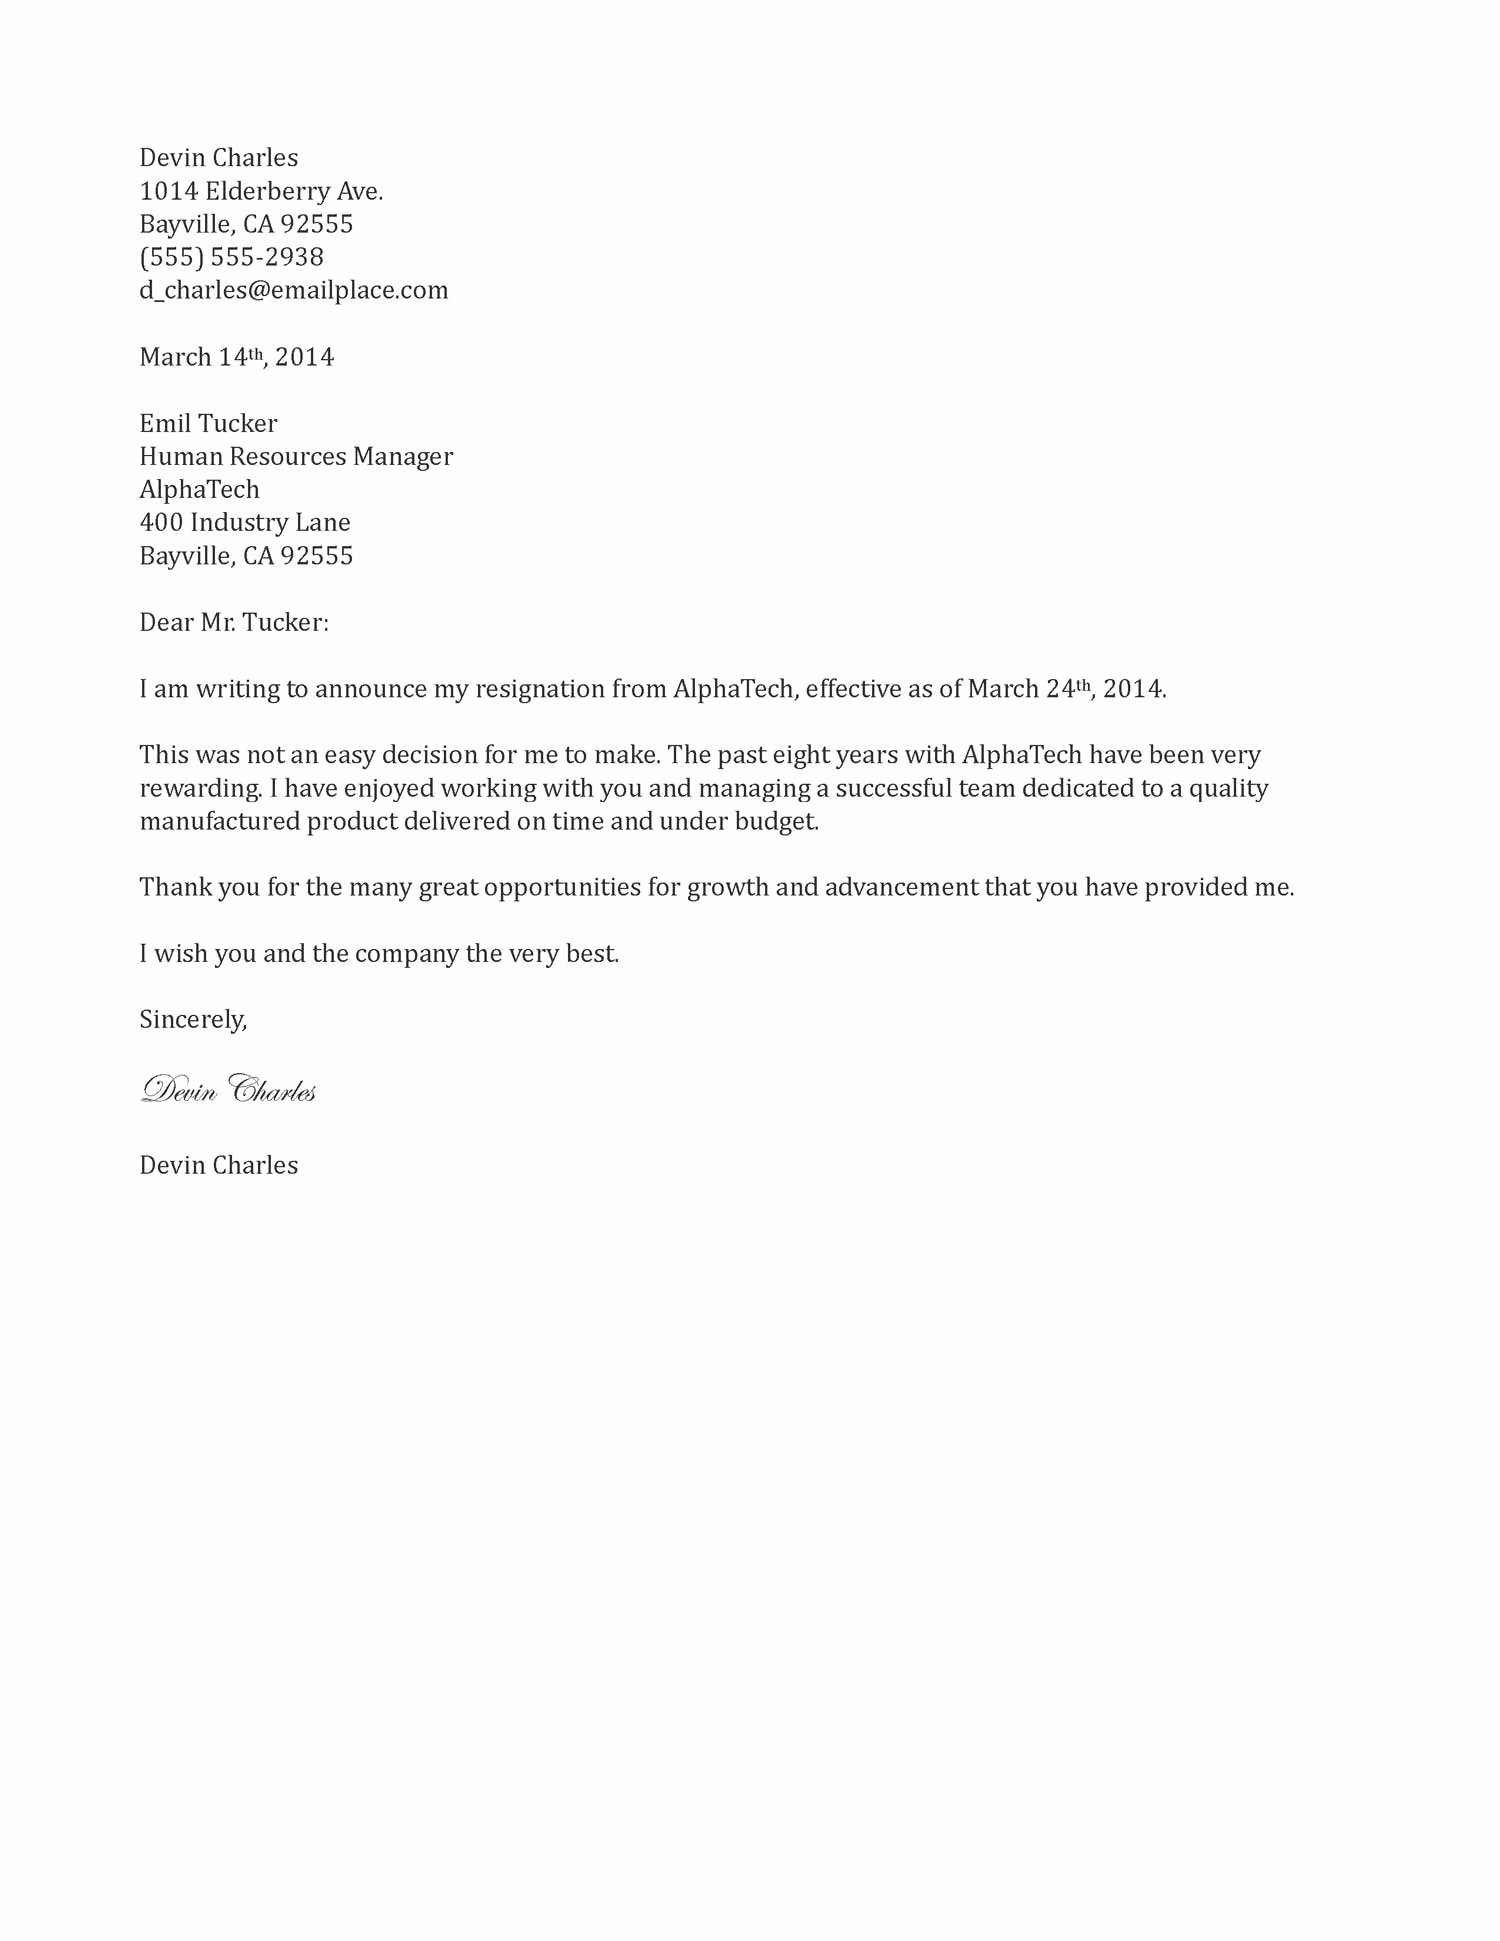 2 Weeks Notice Letter format Unique Two Weeks Notice Letter Template